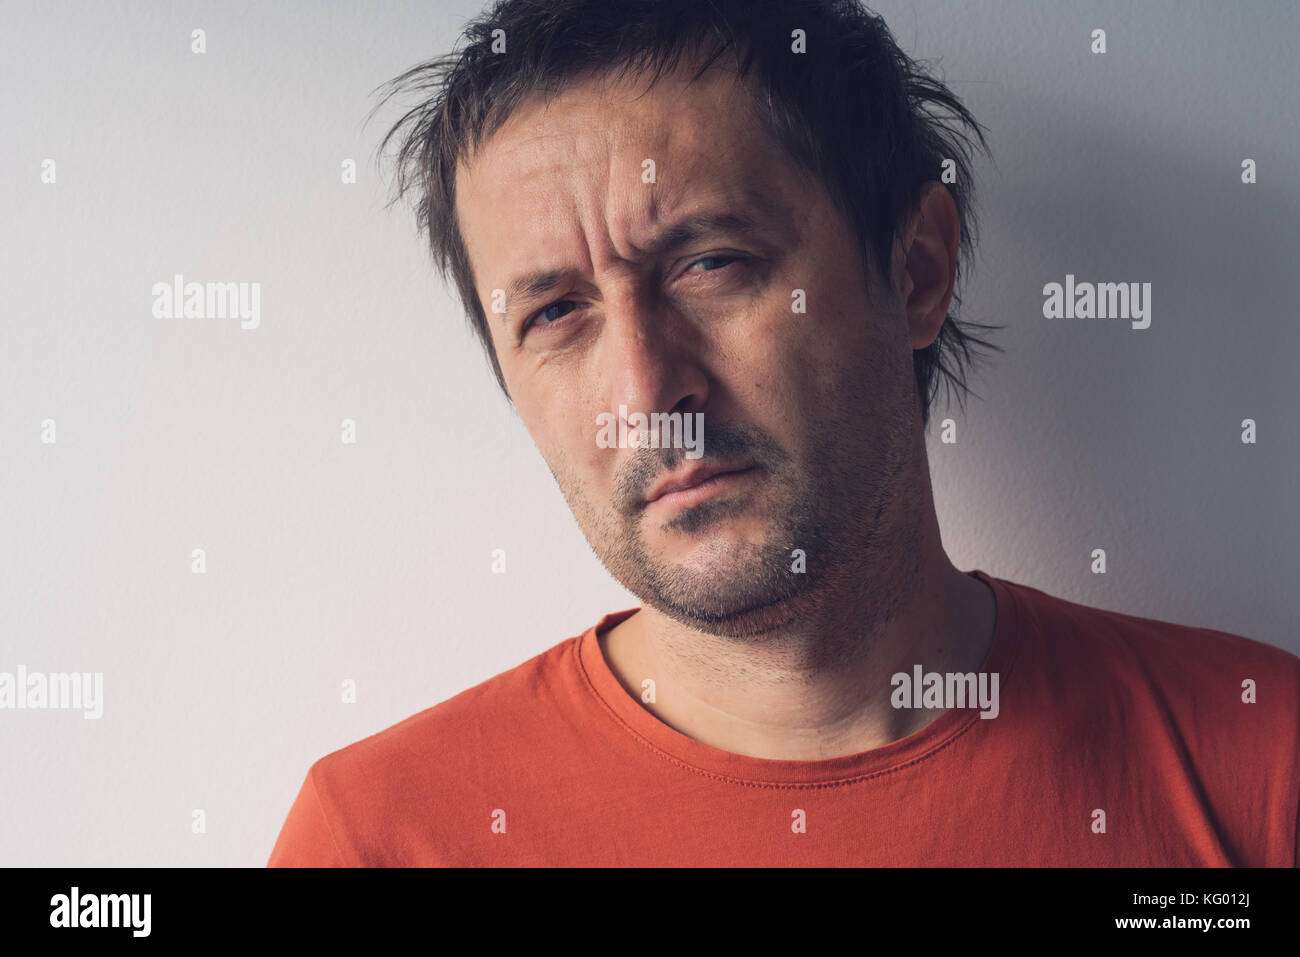 Serious portrait of adult caucasian man looking at camera, real people facial expressions Stock Photo